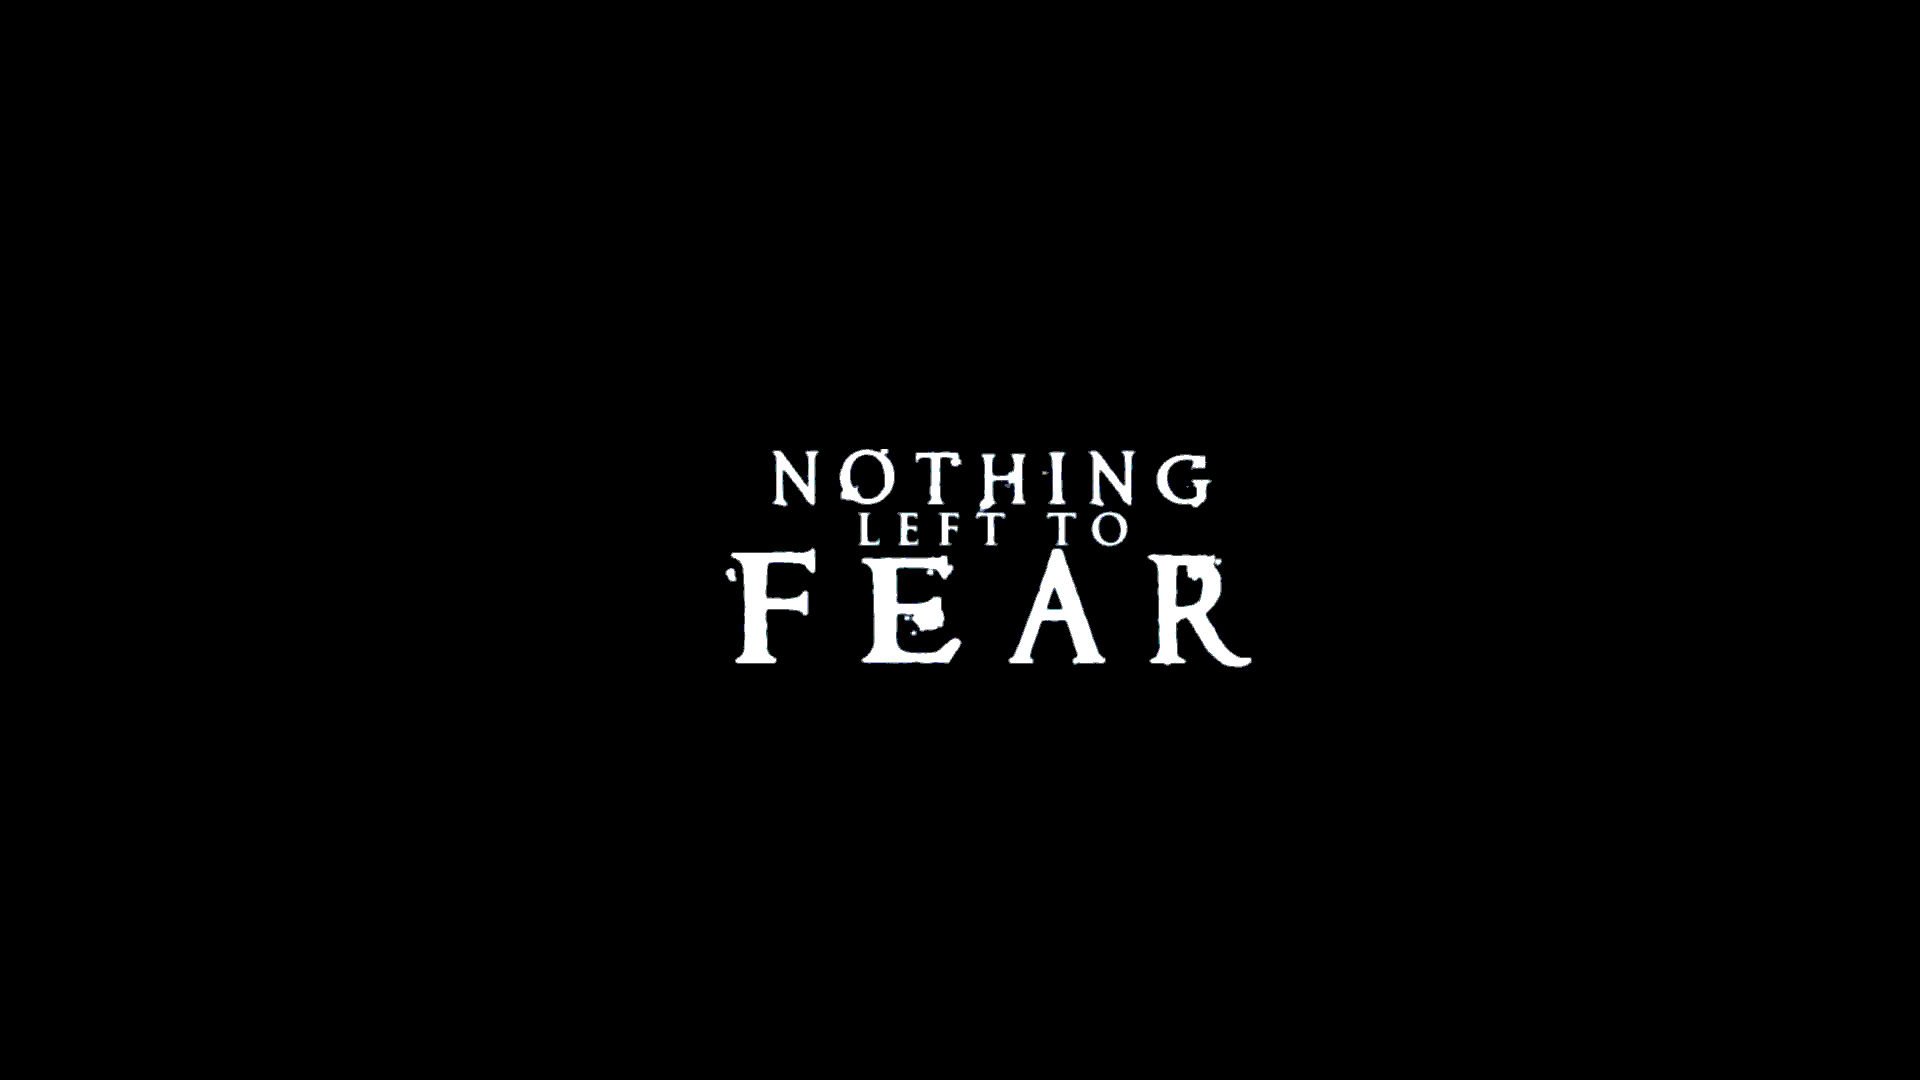 NOTHING LEFT TO FEAR Dark Horror Supernatural Nothing Left Fear Wallpaperx1080